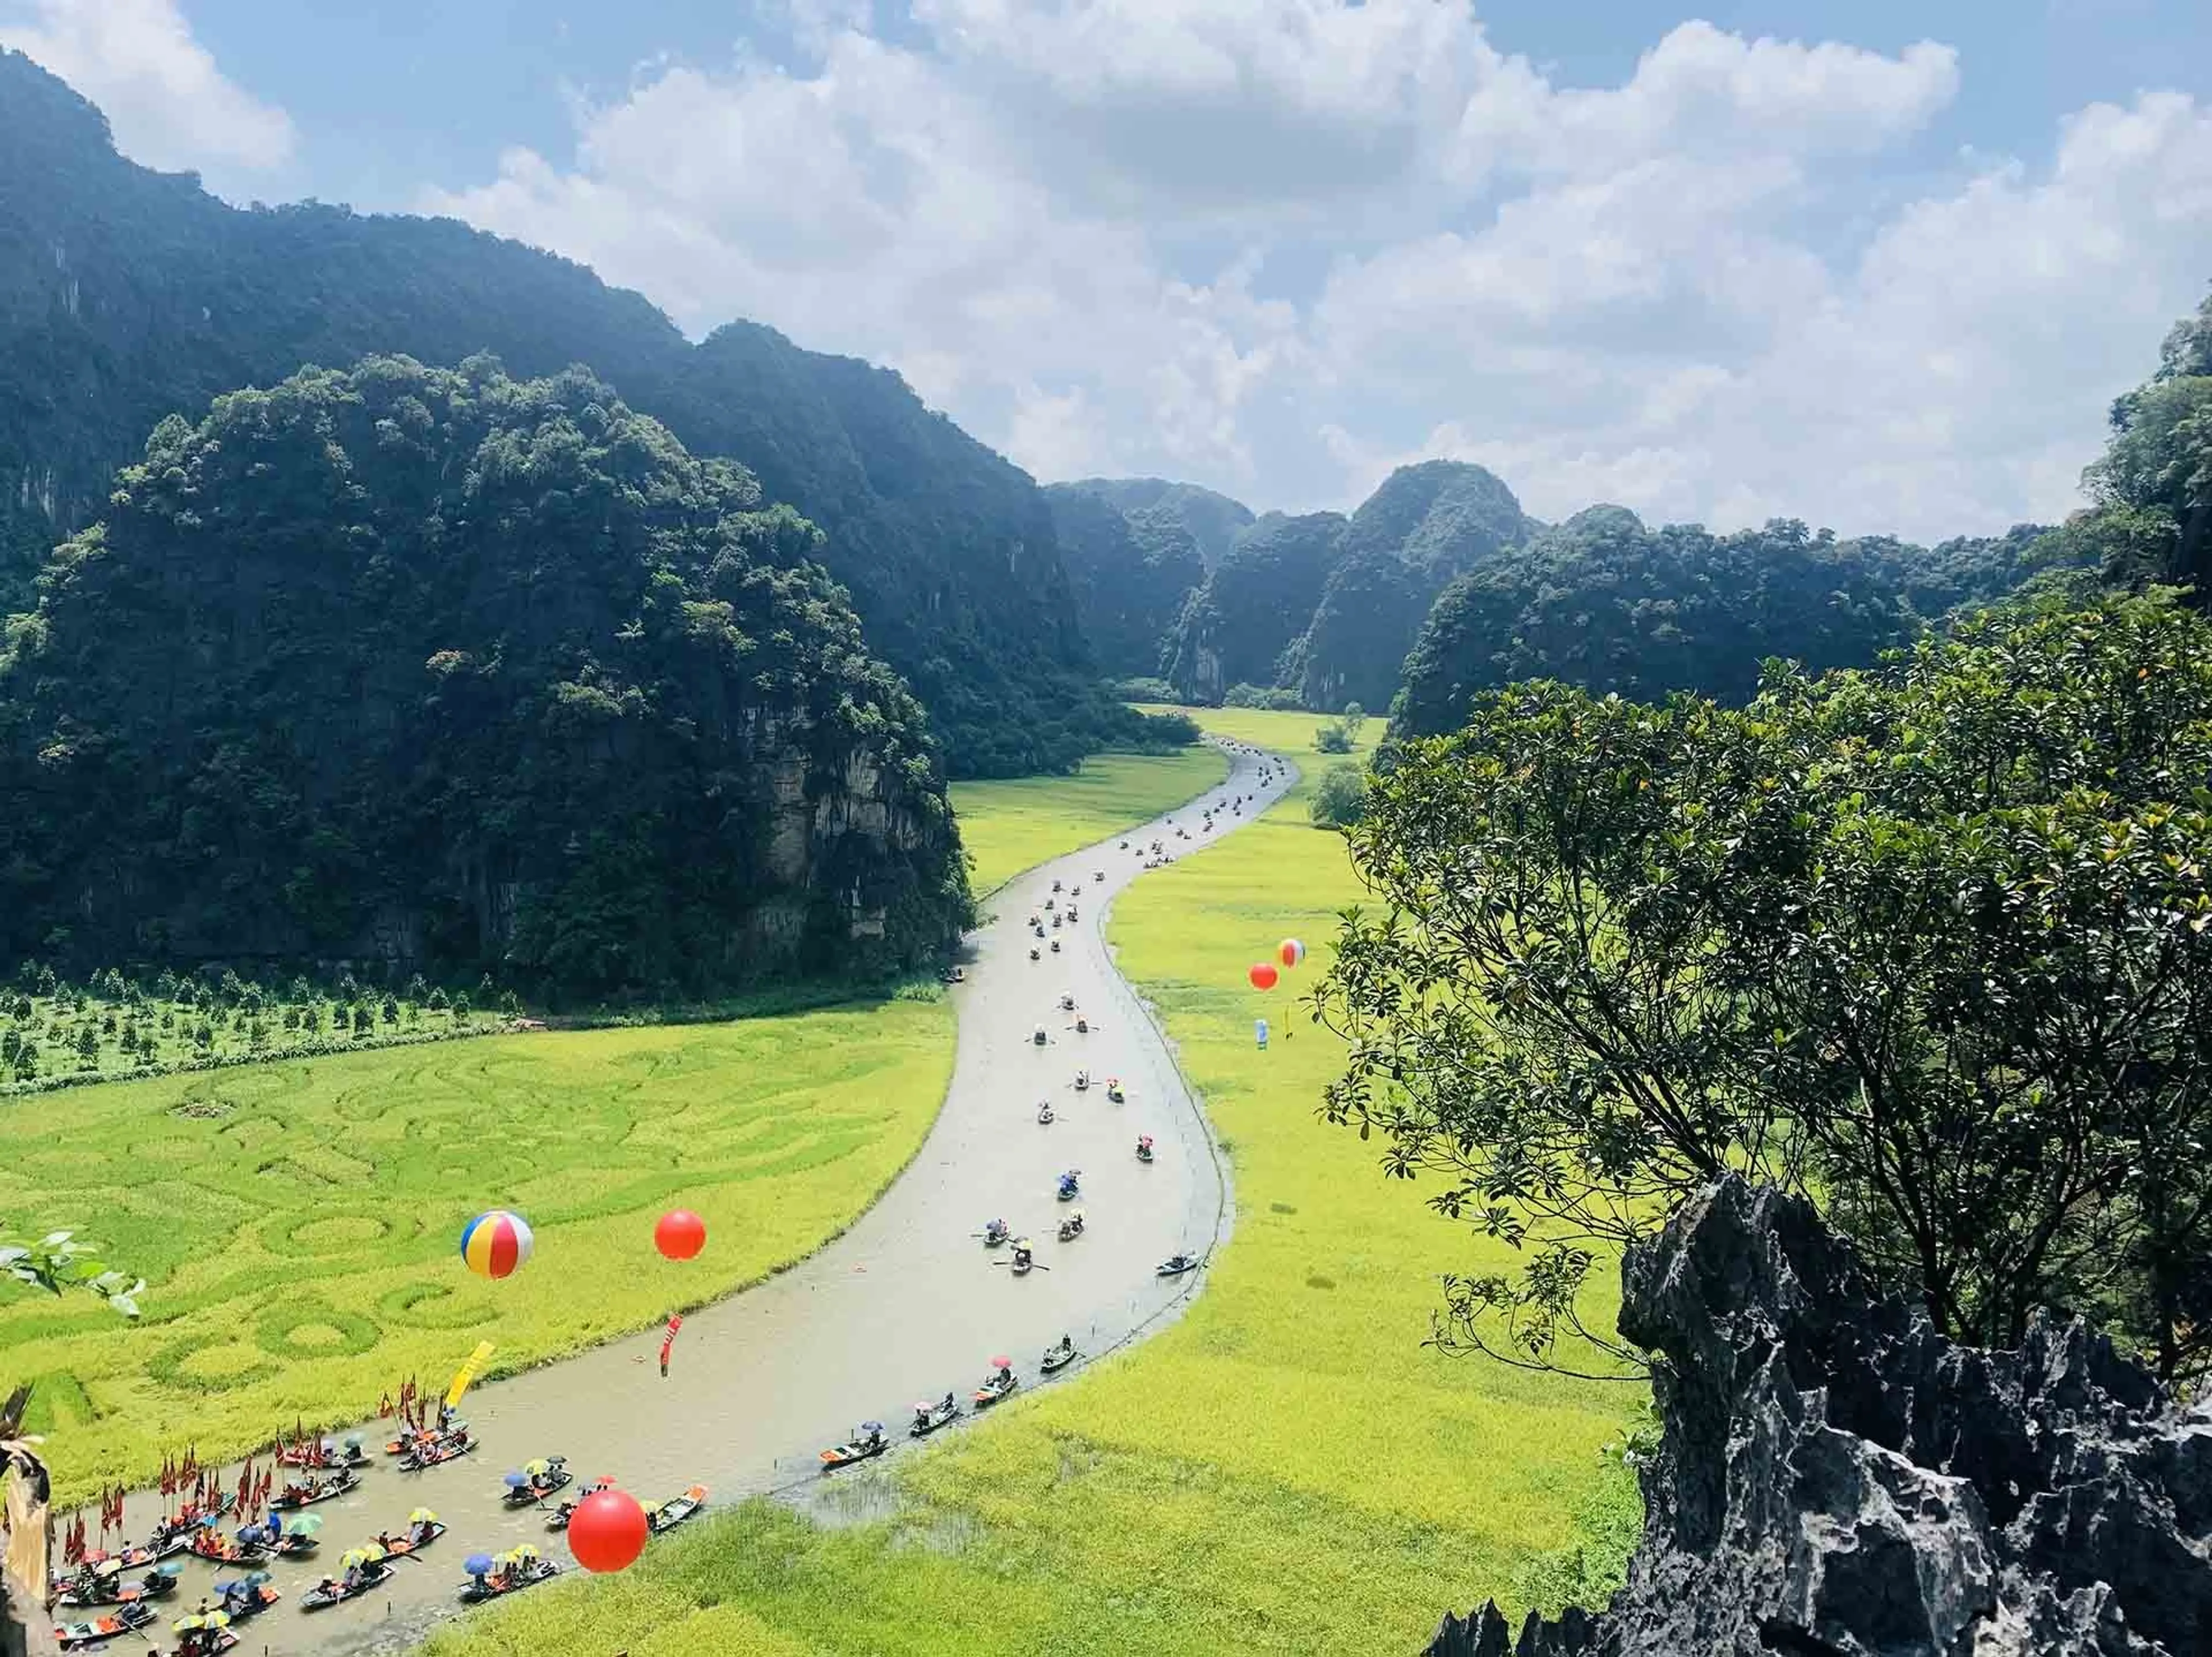 Experience adventure activities at Tam Coc-Bich Dong